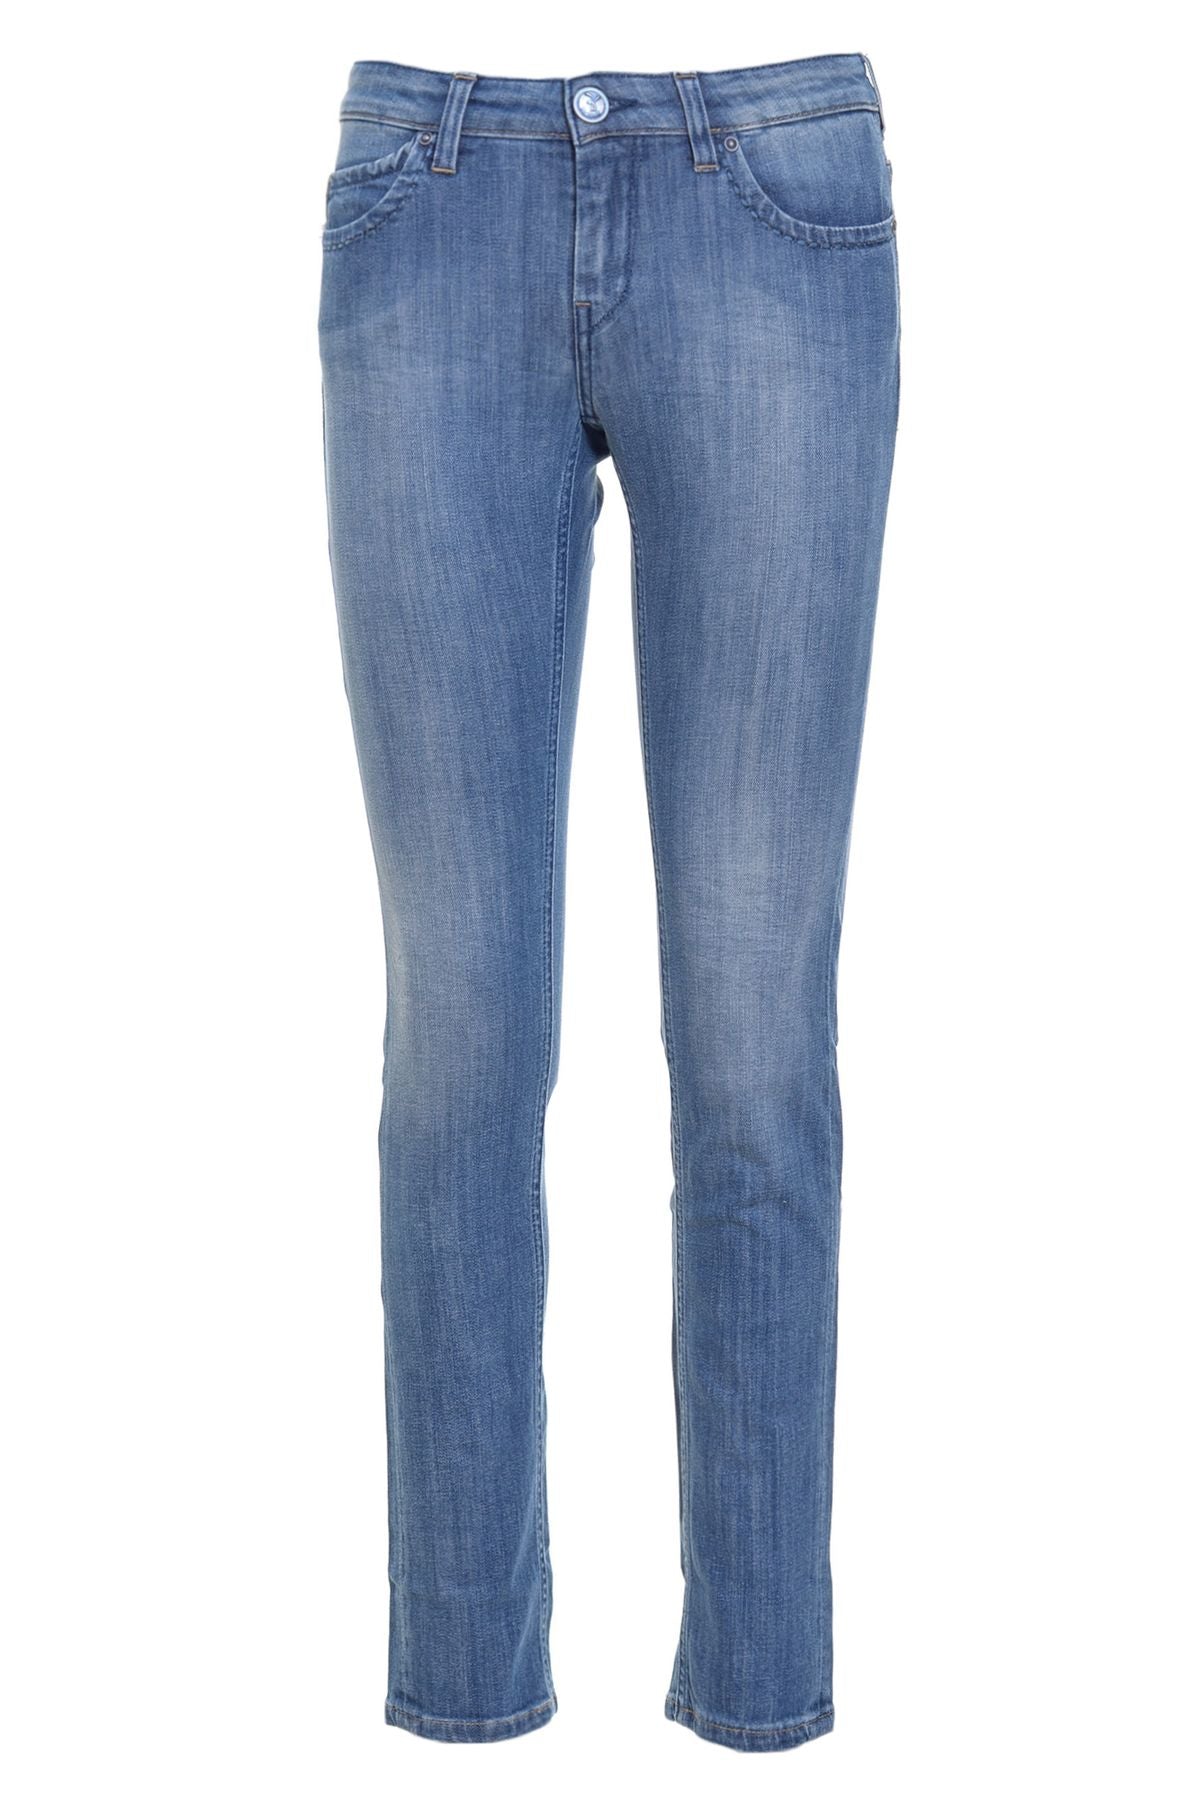 Re-HasH Jeans Autunno/Inverno p265holly2530